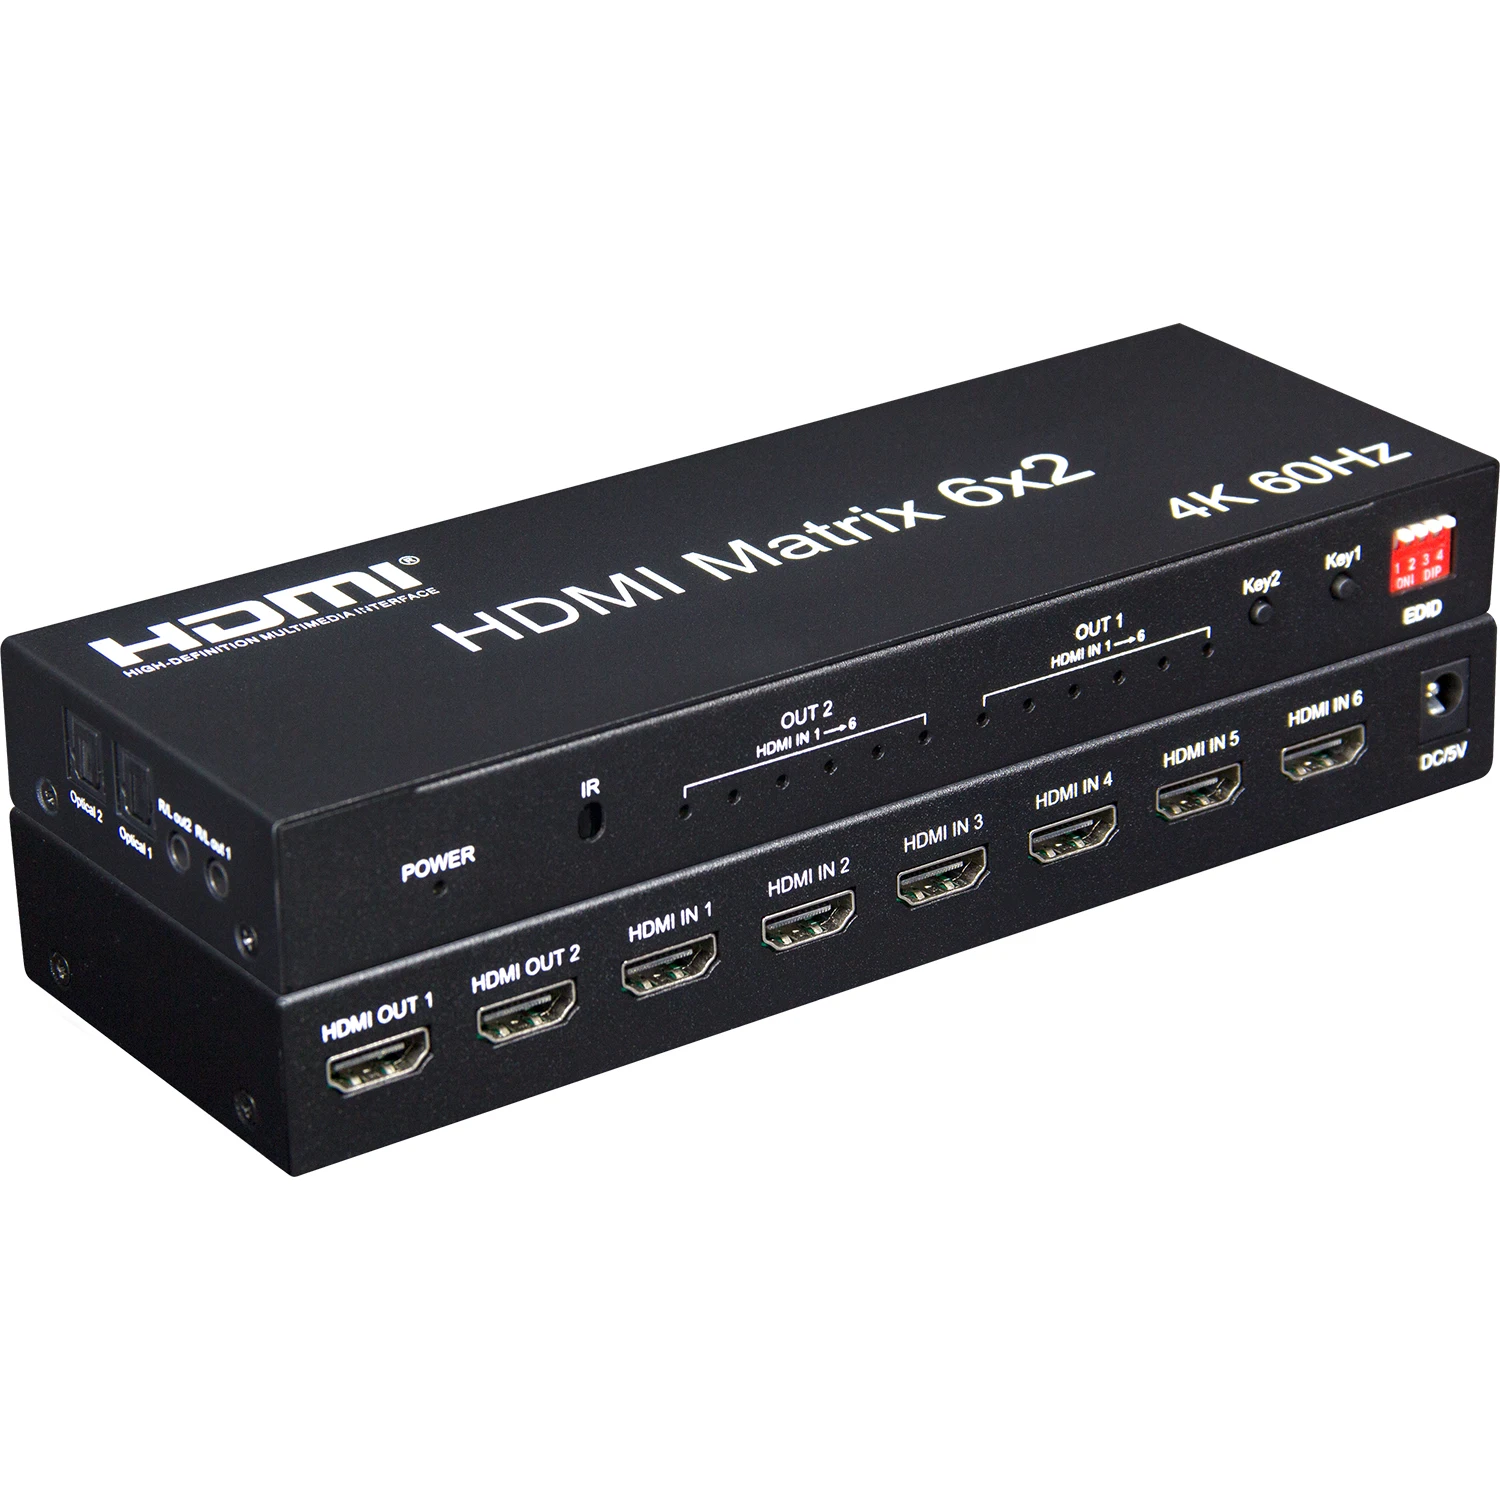 4K 60hz HDMI Matrix 4X2 with Audio HDMI 2.0 6X2 Matrix Switcher Switch 4 In 2 Out Splitter for PS4 Computer PC TV Dual Monitor